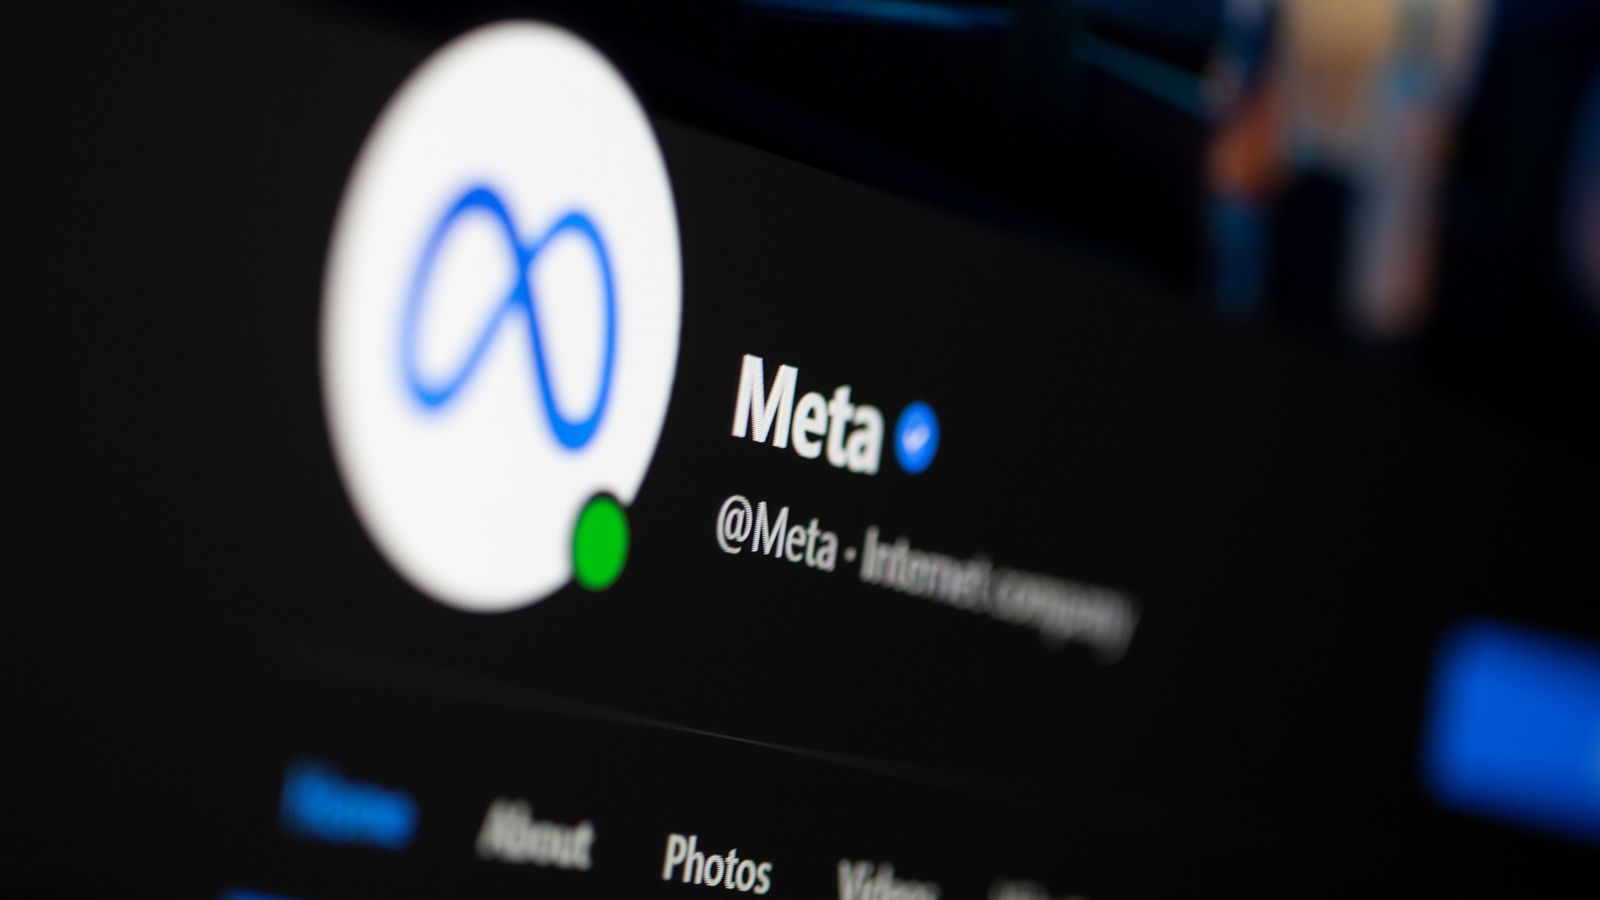 Facebook changed its name to Meta this is how the reacted